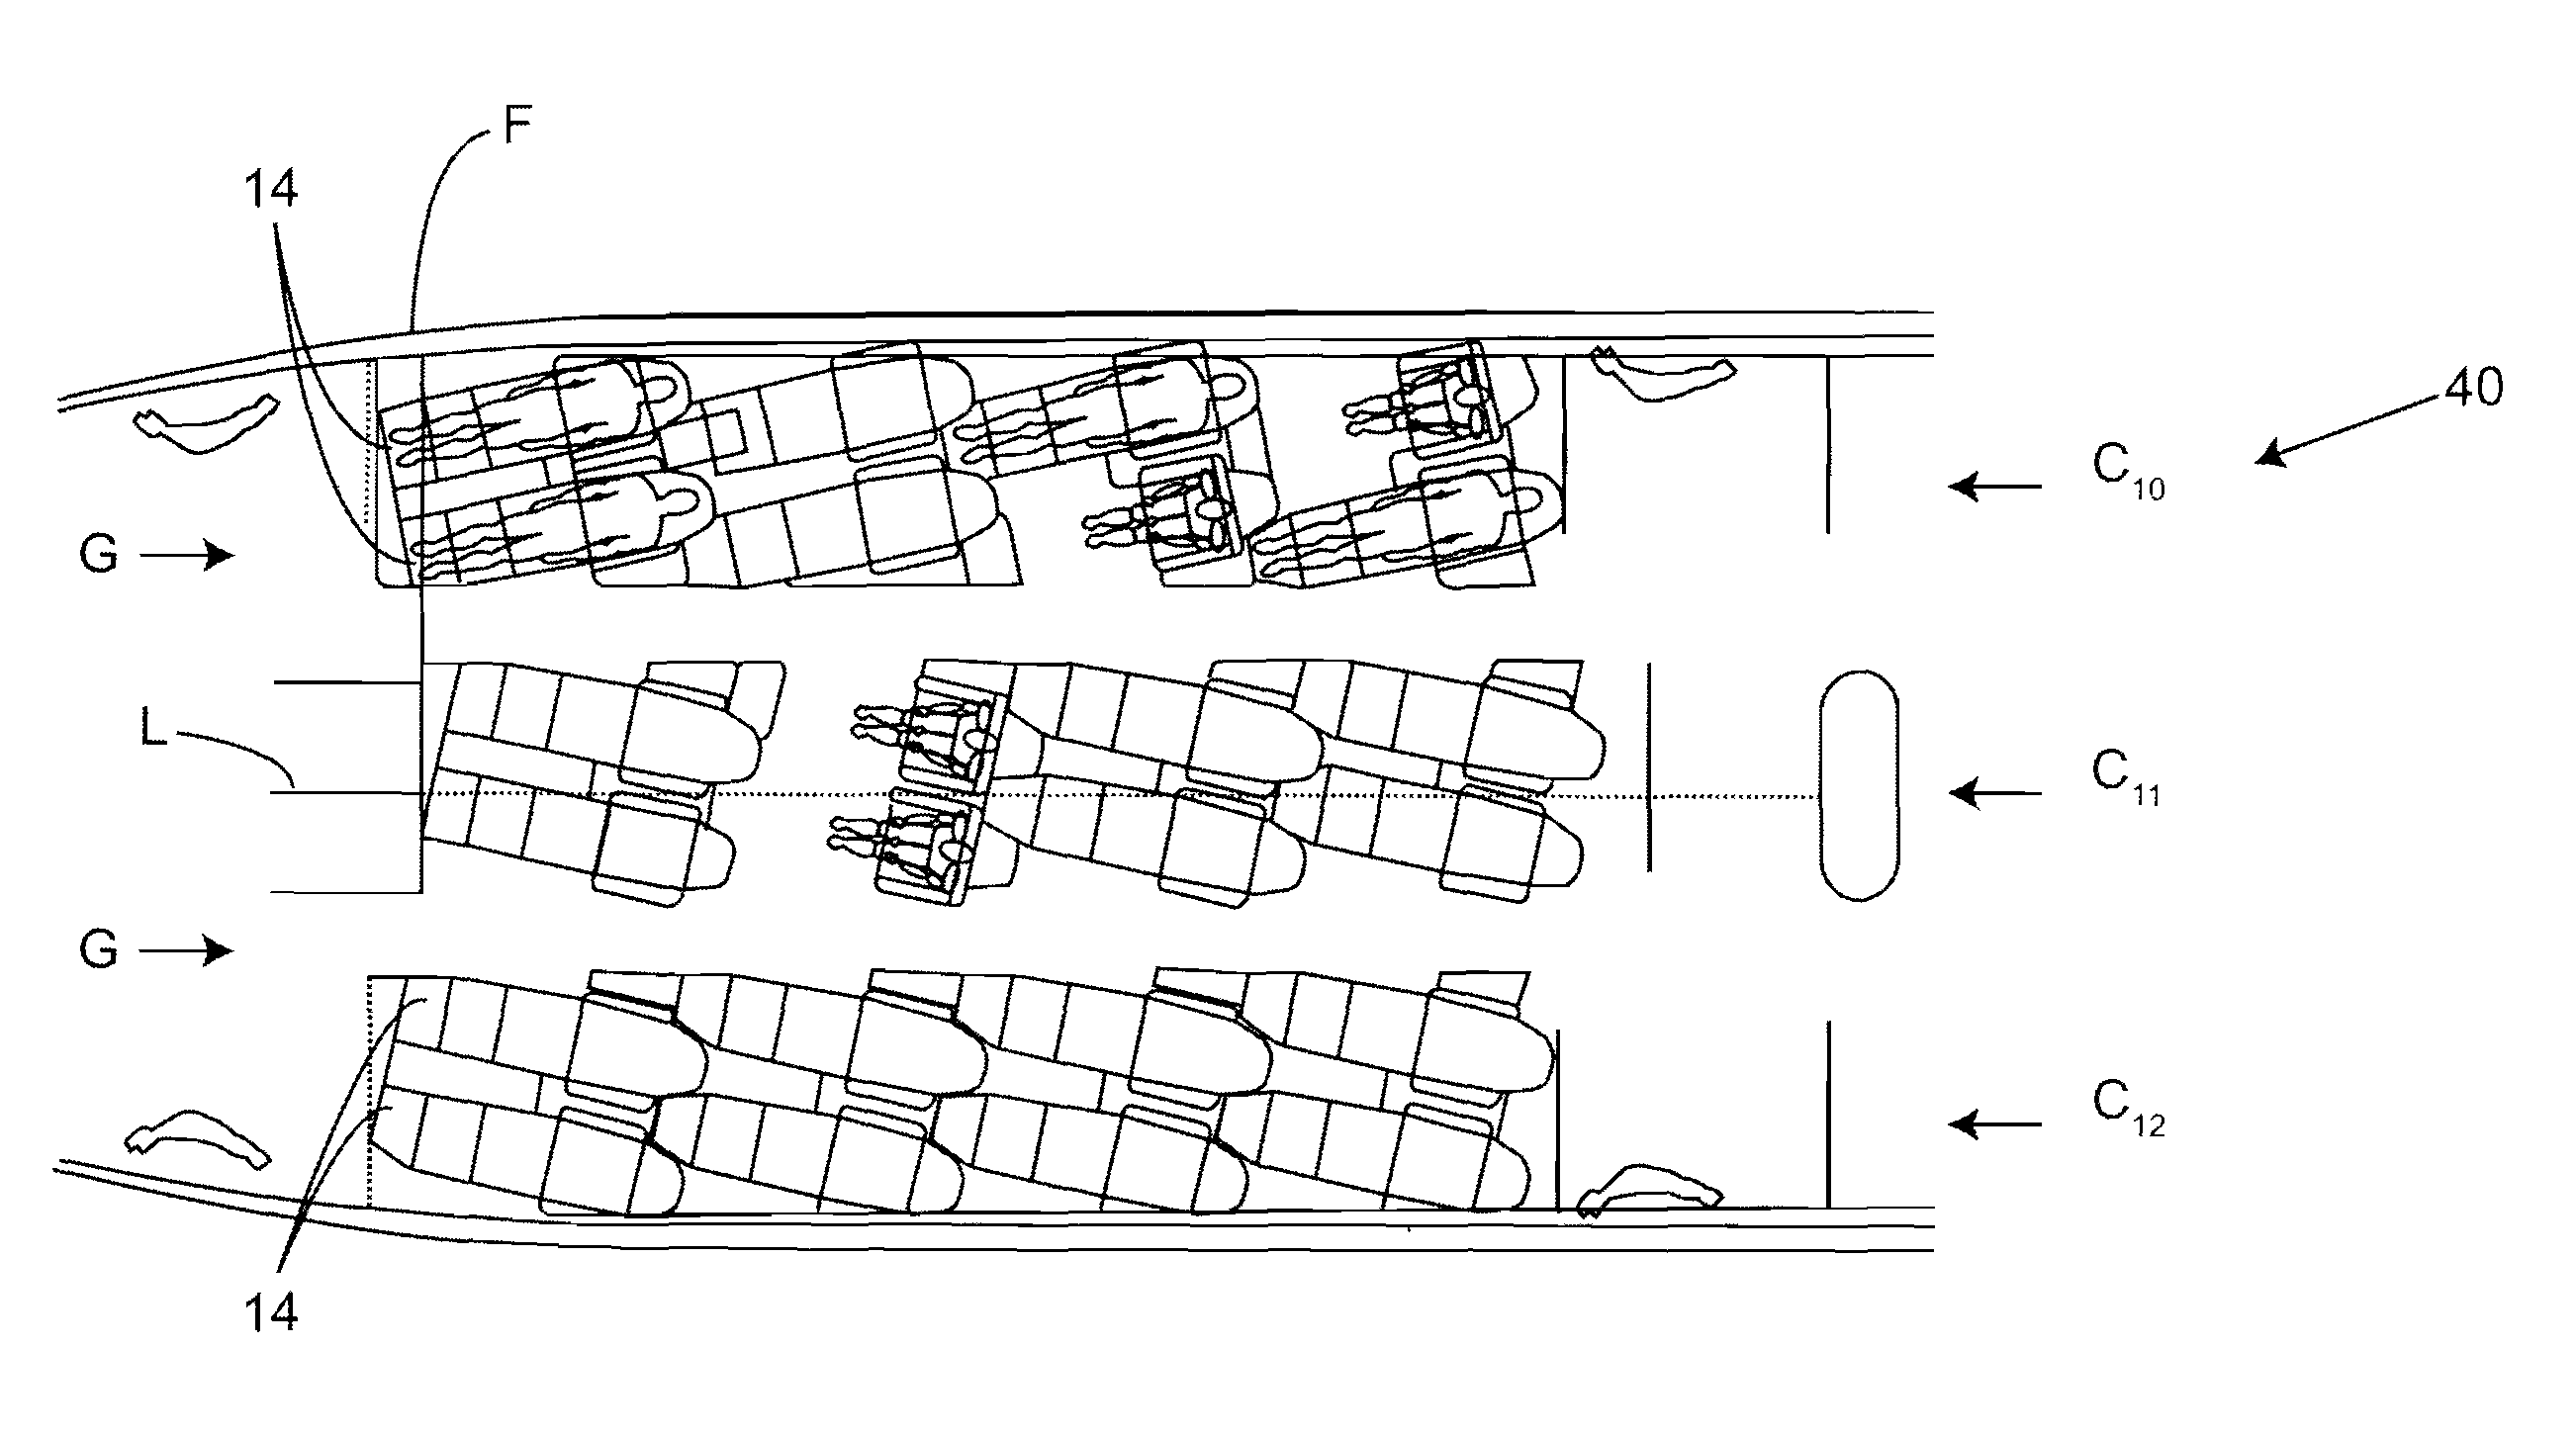 Seating arrangements particularly for passenger aircraft